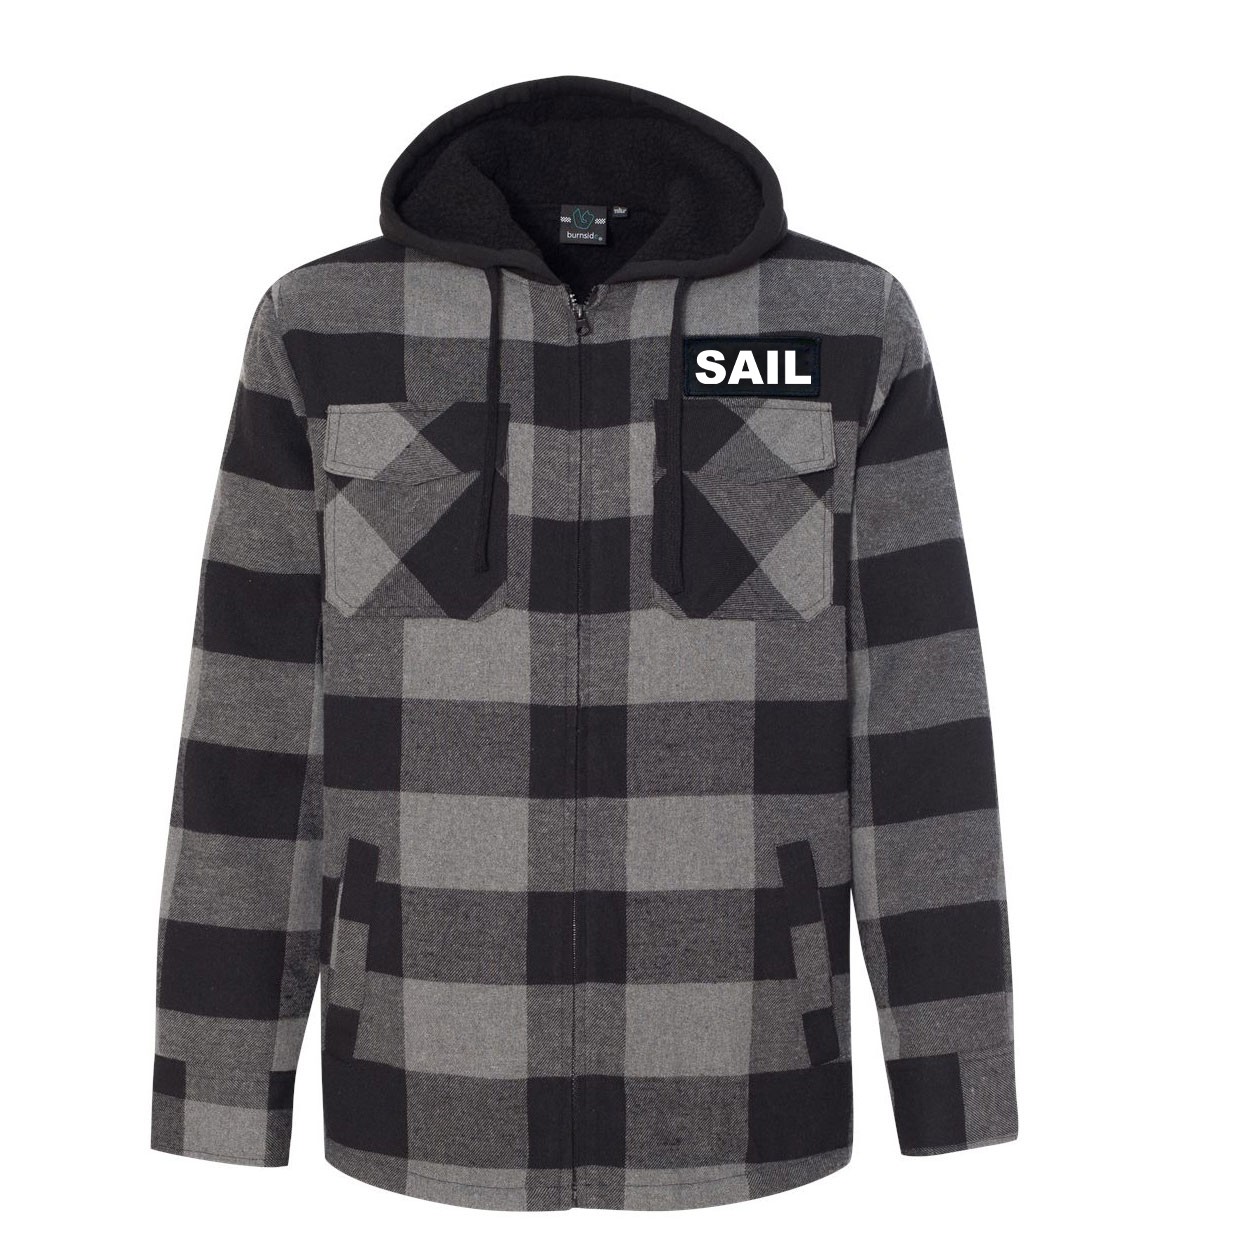 Sail Brand Logo Classic Unisex Full Zip Woven Patch Hooded Flannel Jacket Black/Gray